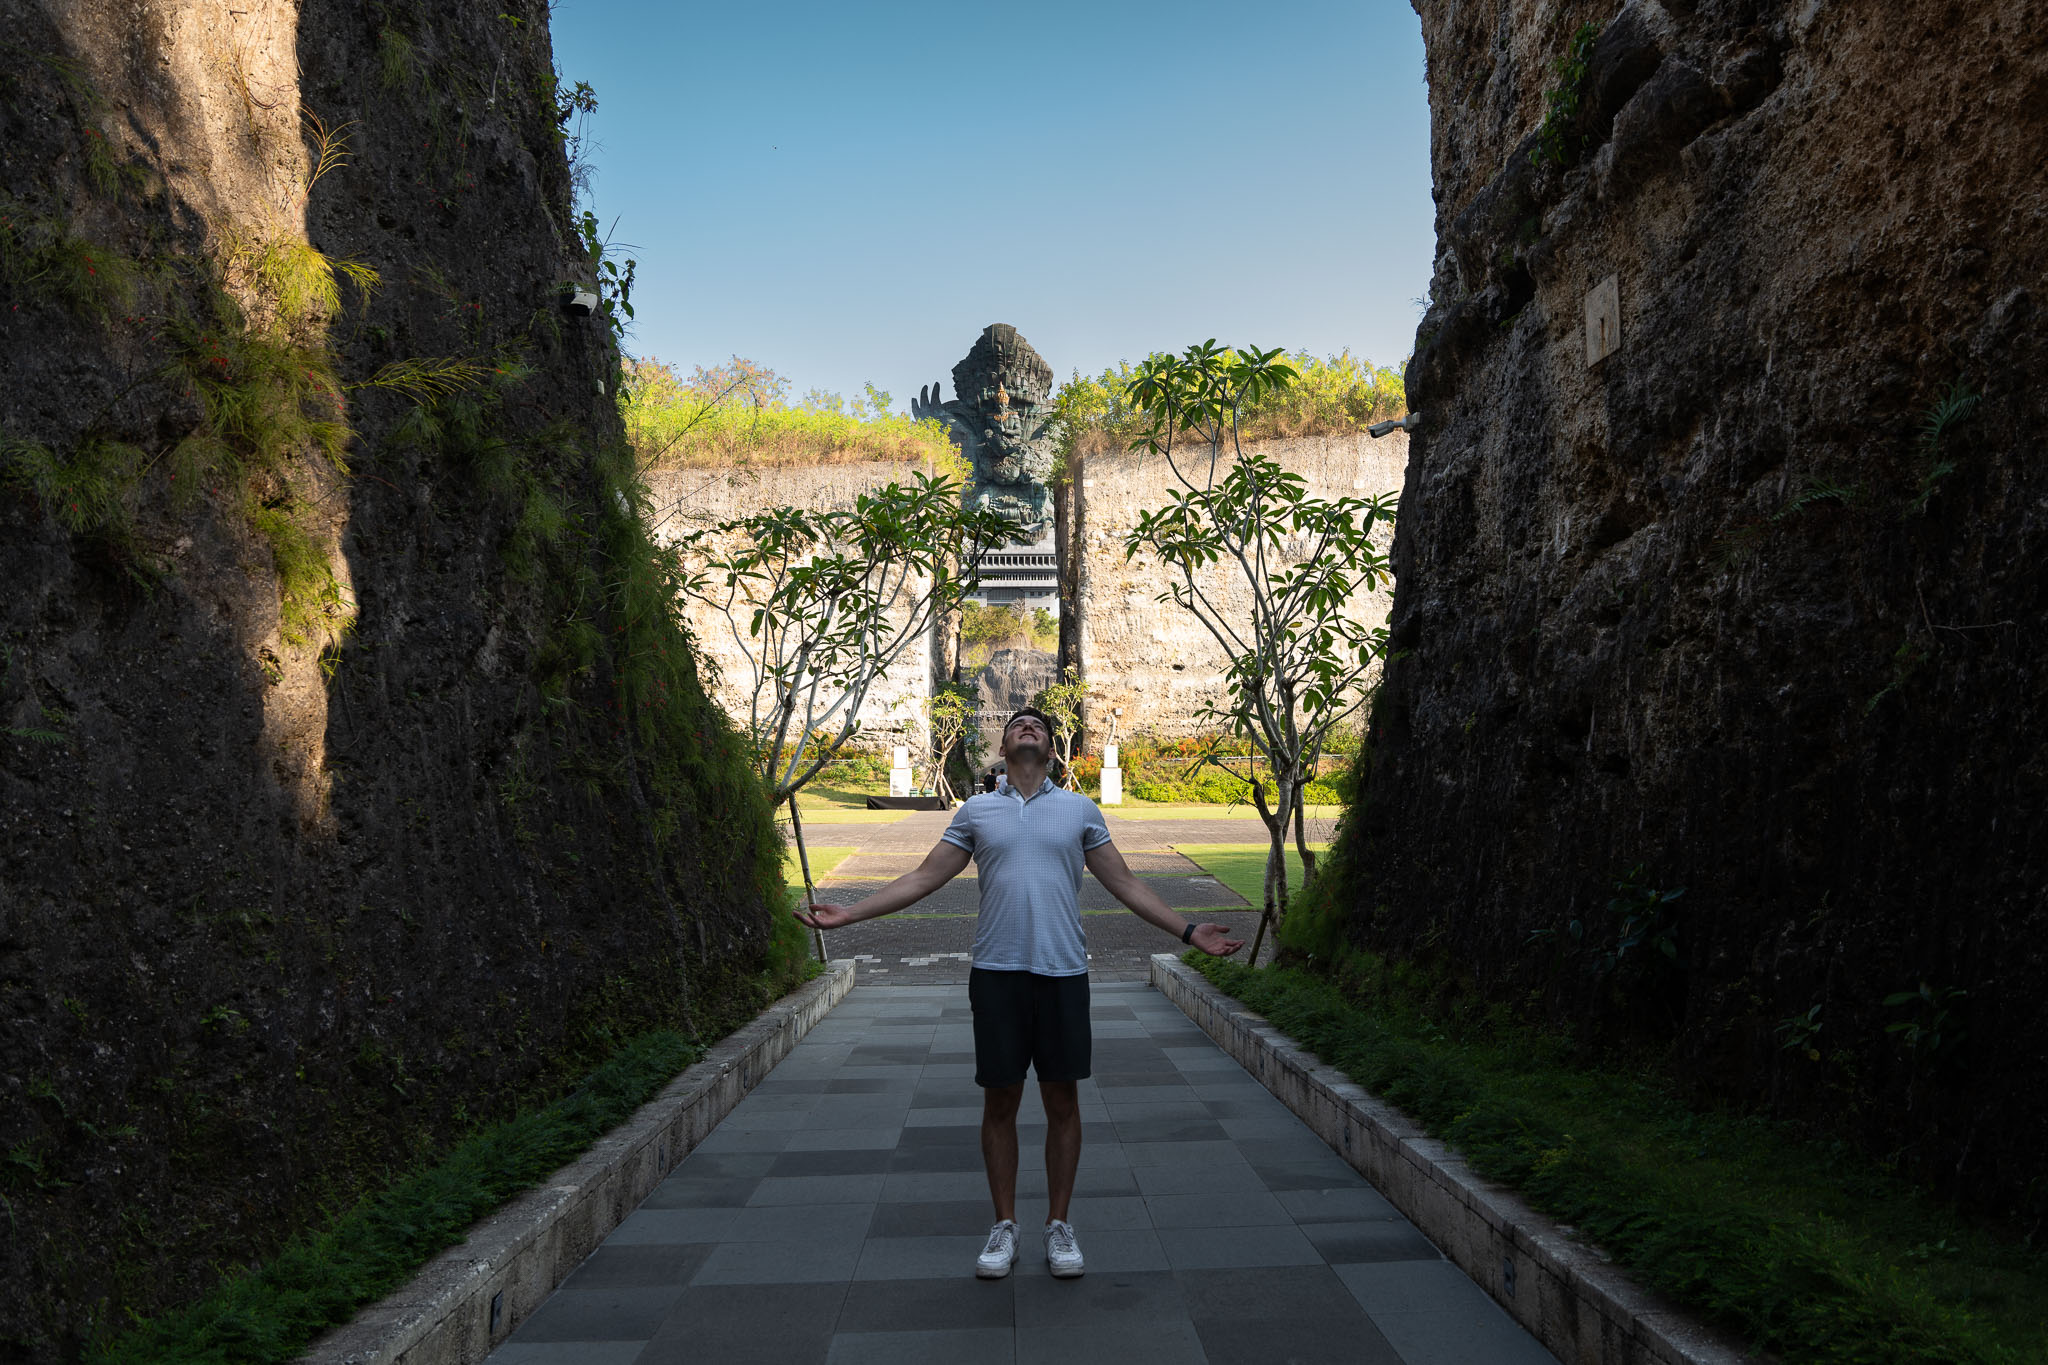 Things to do in Uluwatu VIsit the GWK Statue